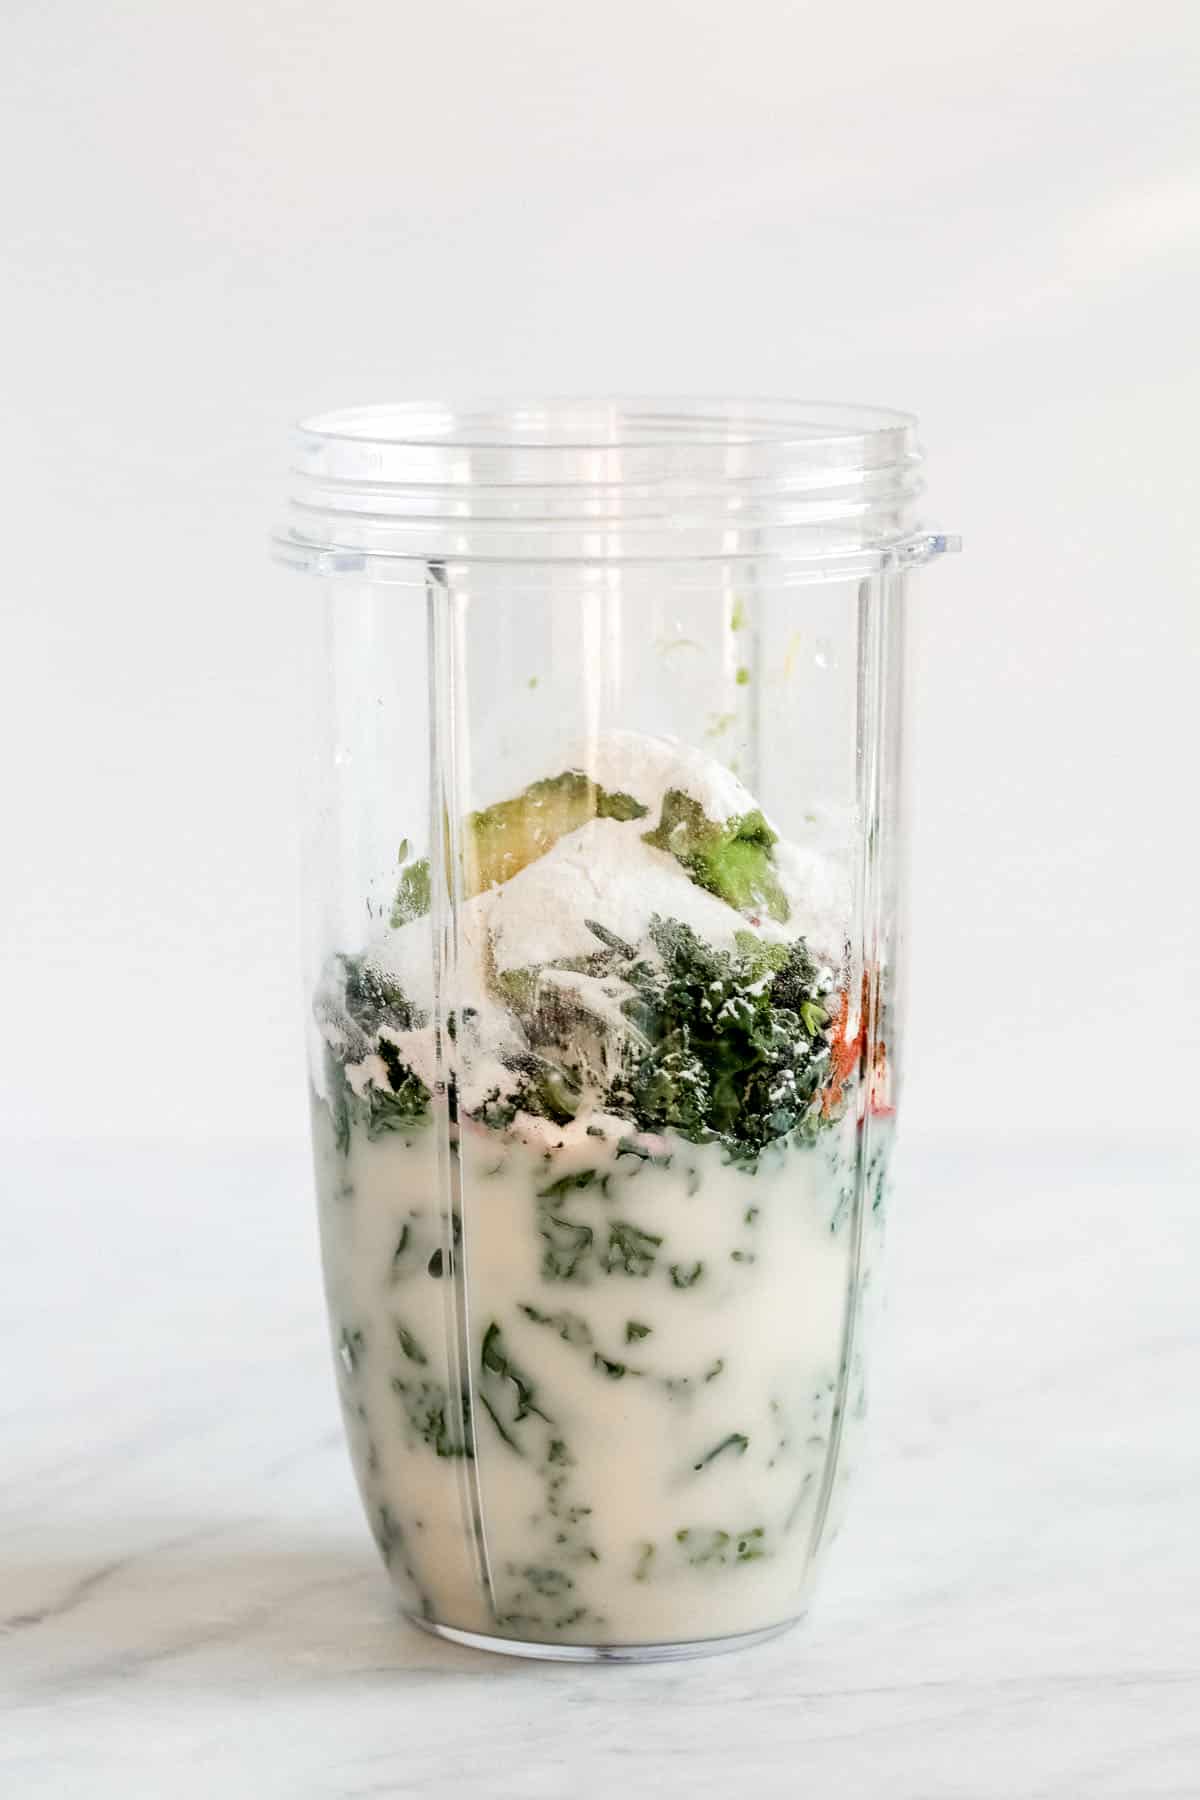 milk, kale and avocado in a blender cup